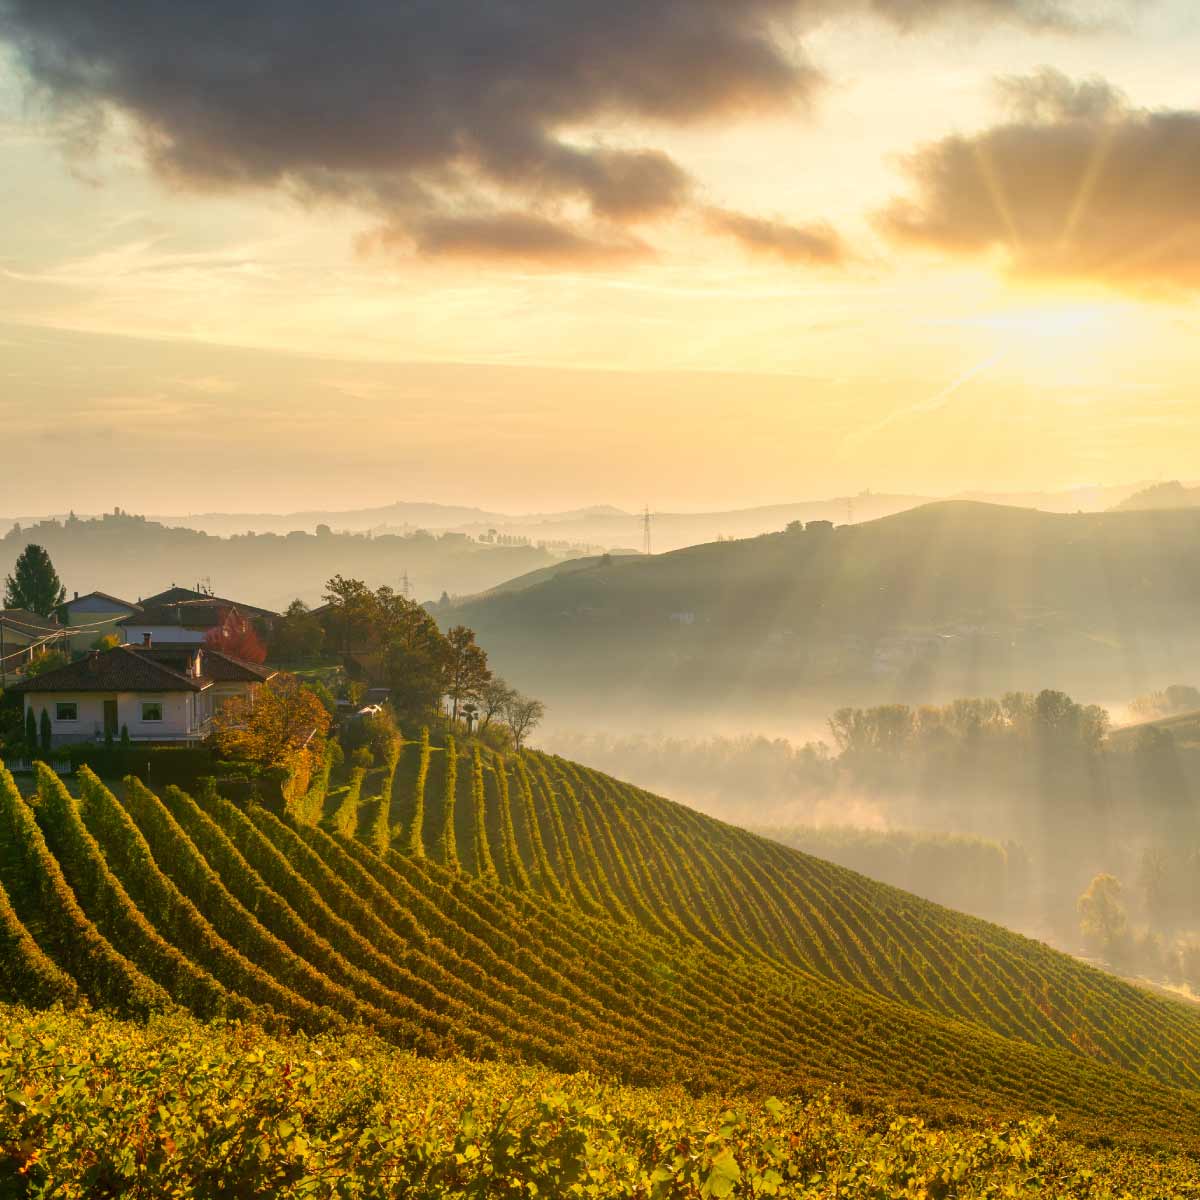 vineyards of Piedmont Italy in a sunset view